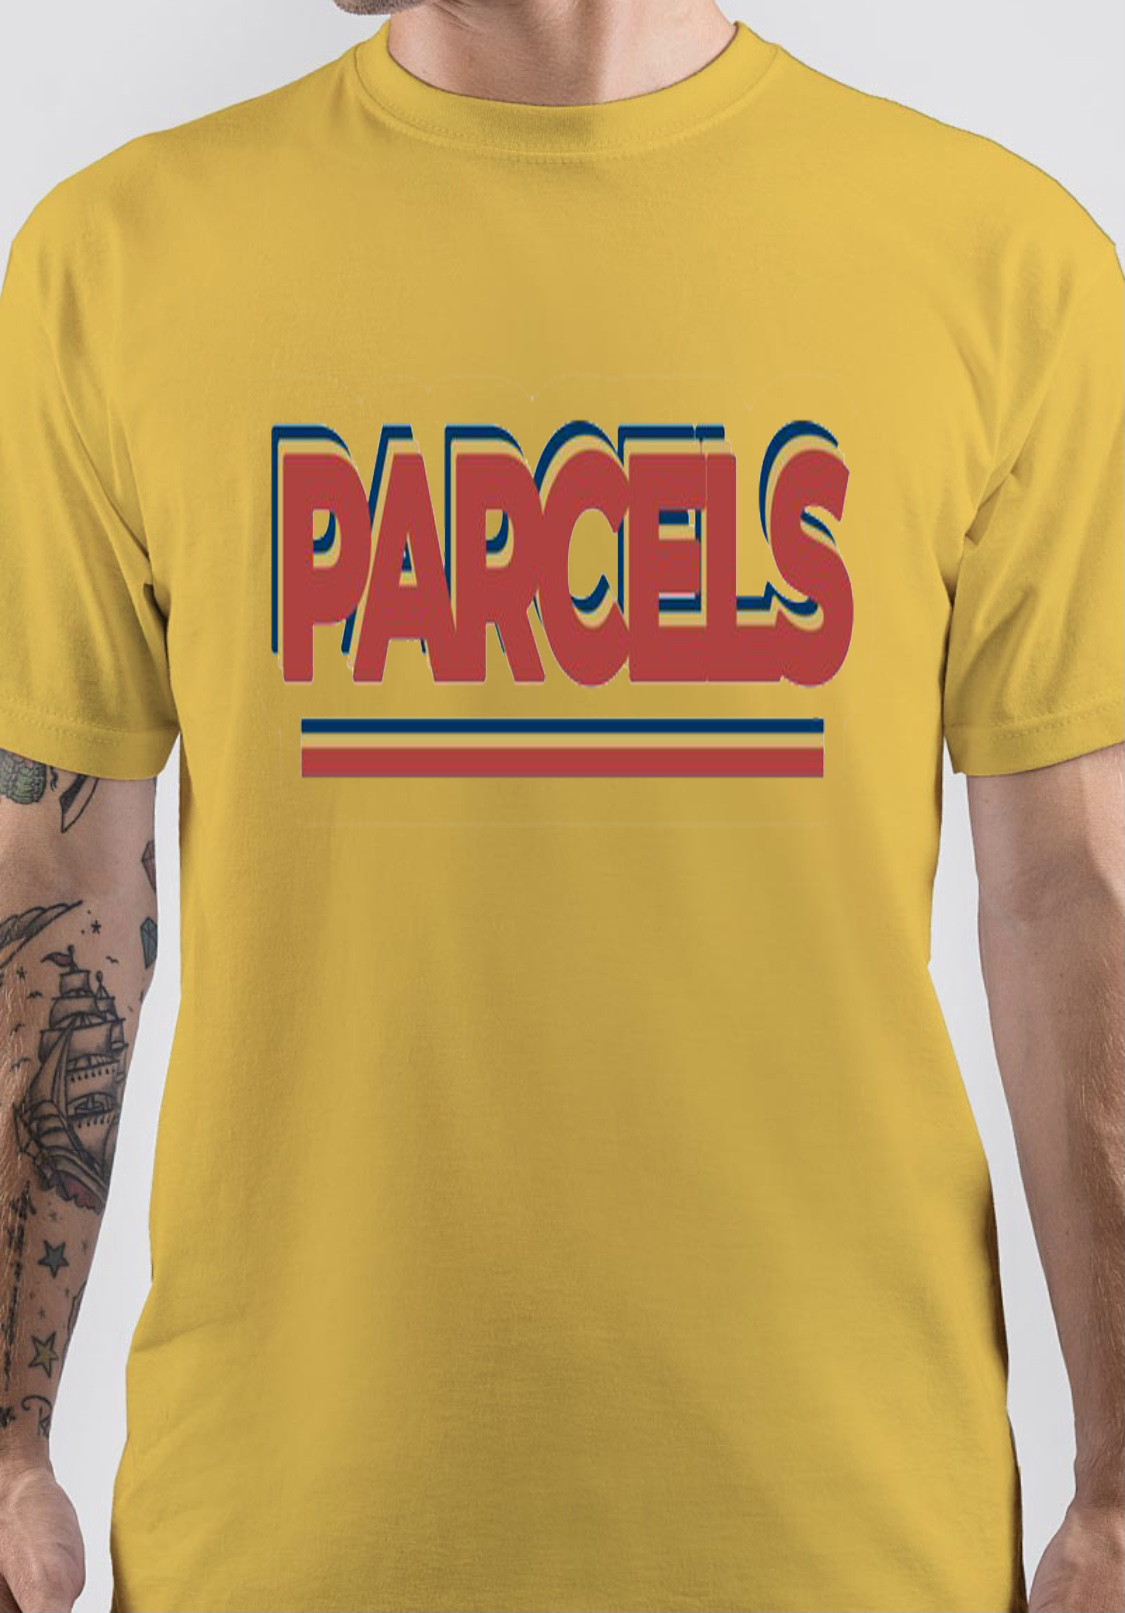 parcels-band-t-shirt-and-merchandise-archives-swag-shirts